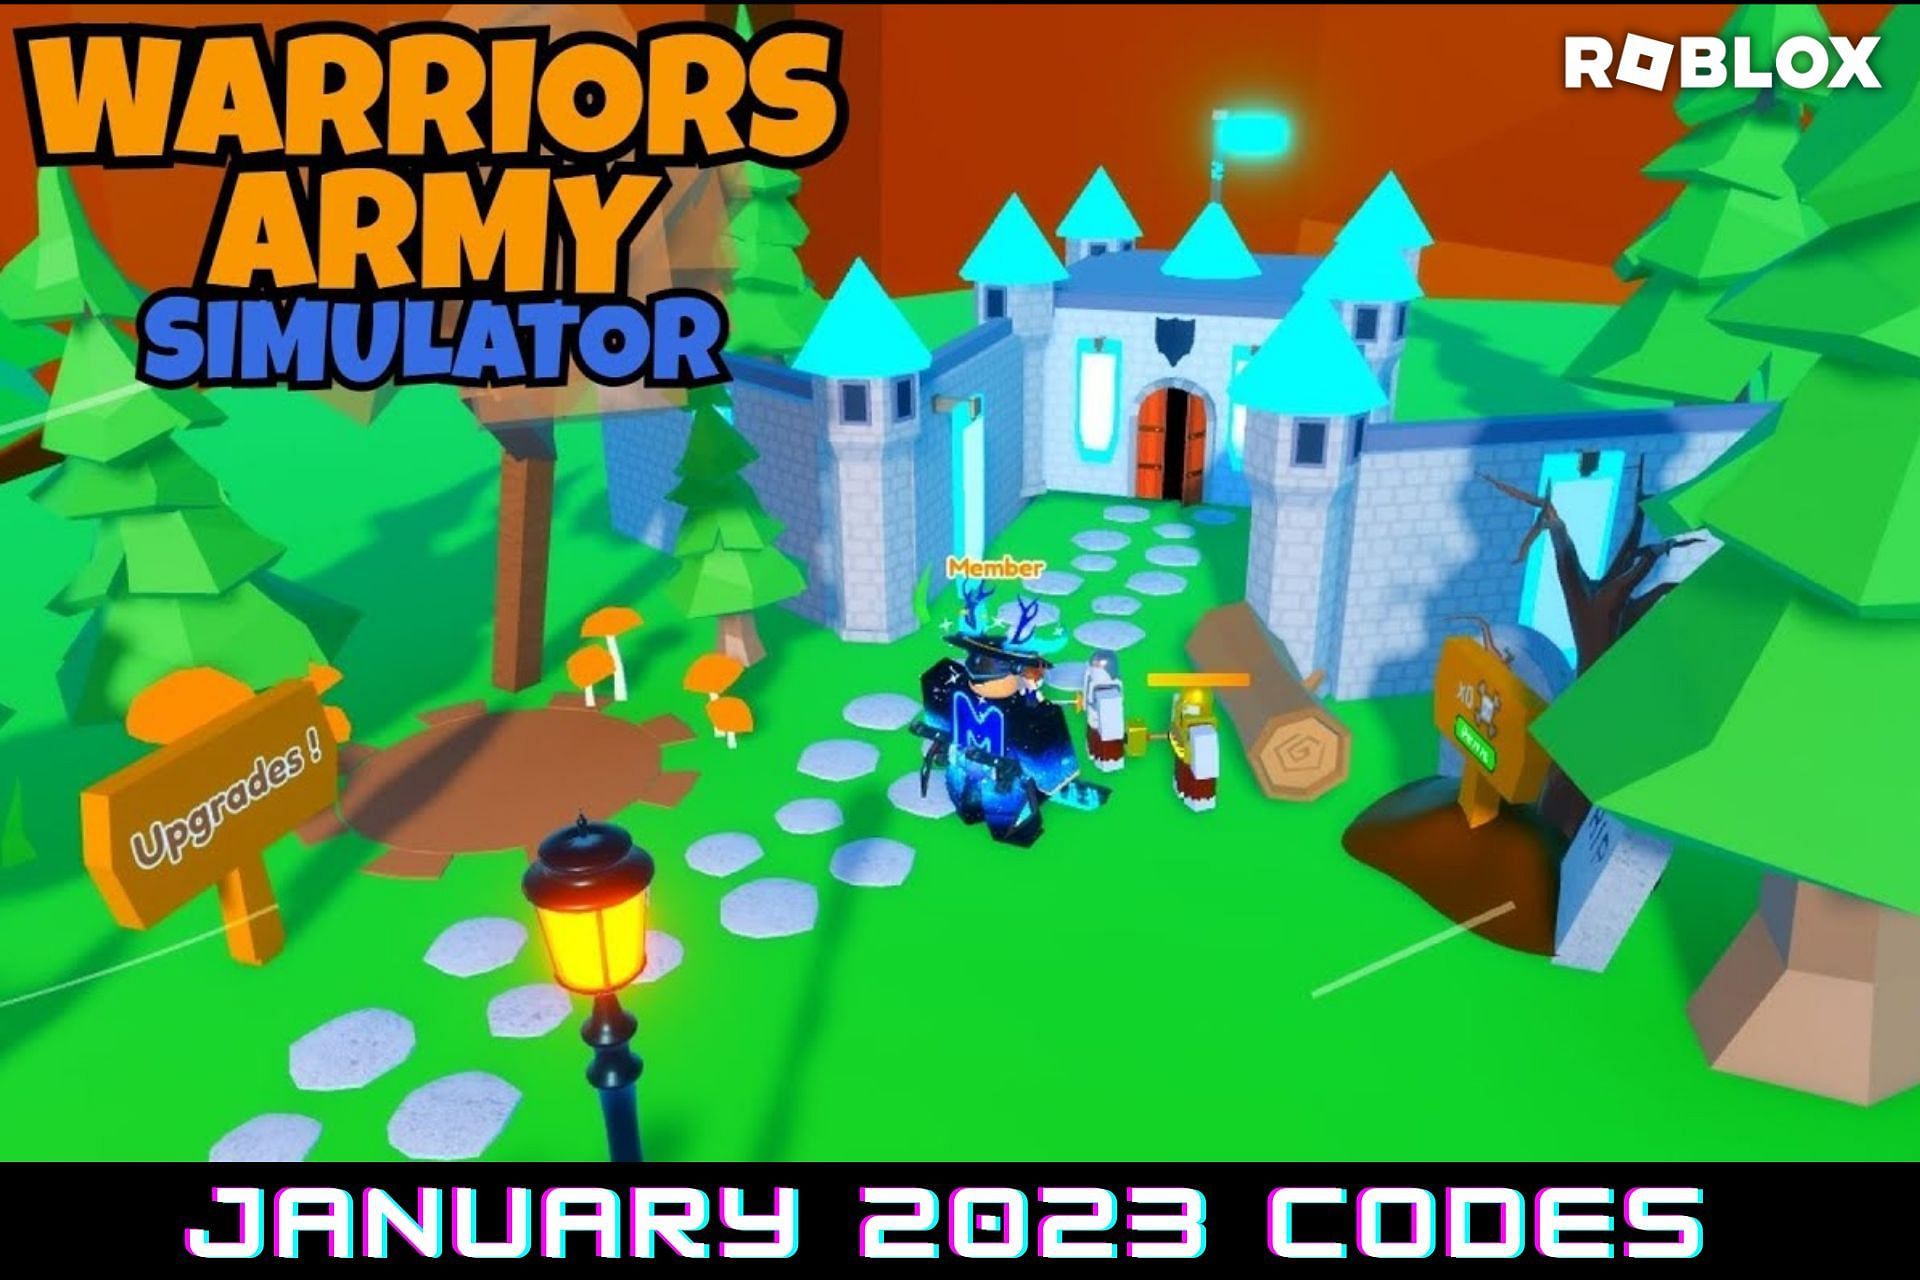 roblox-warriors-army-simulator-codes-for-january-2023-free-gems-and-boosts